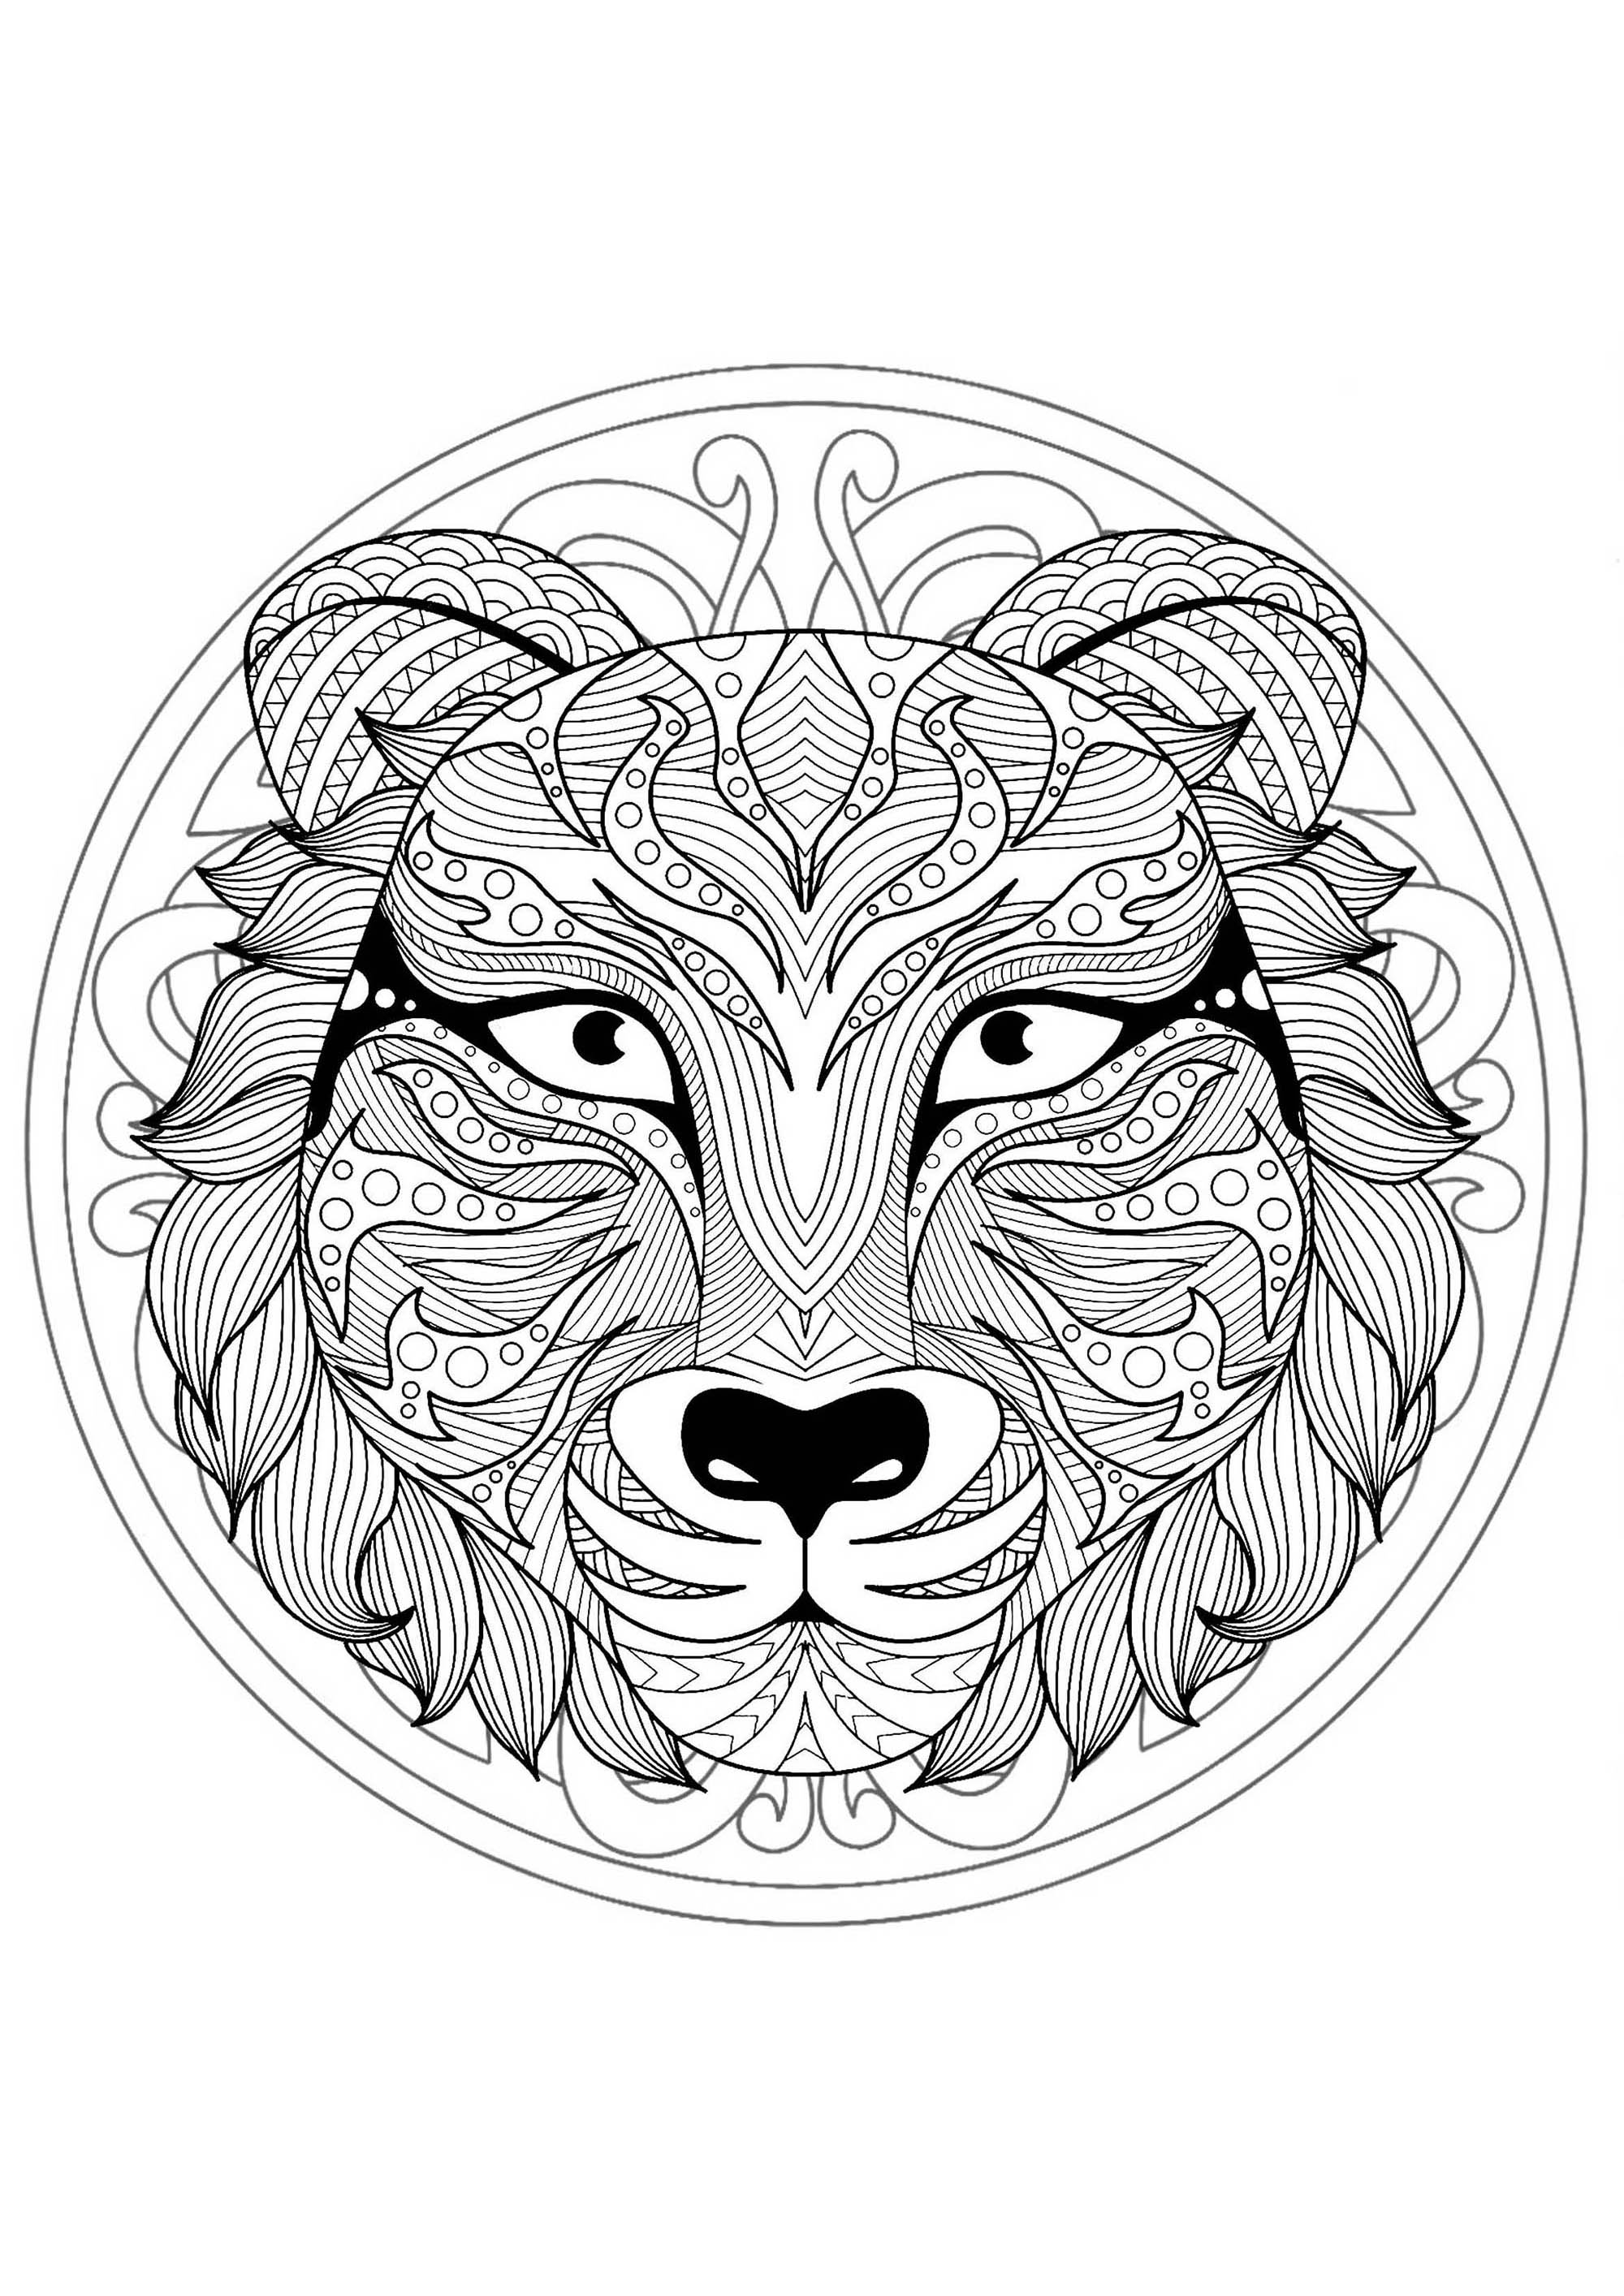 Tiger head in a difficult Mandala. Many small details and little areas for a Mandala very original and harmonious. Do whatever it takes to get rid of any distractions that may interfere with your coloring.